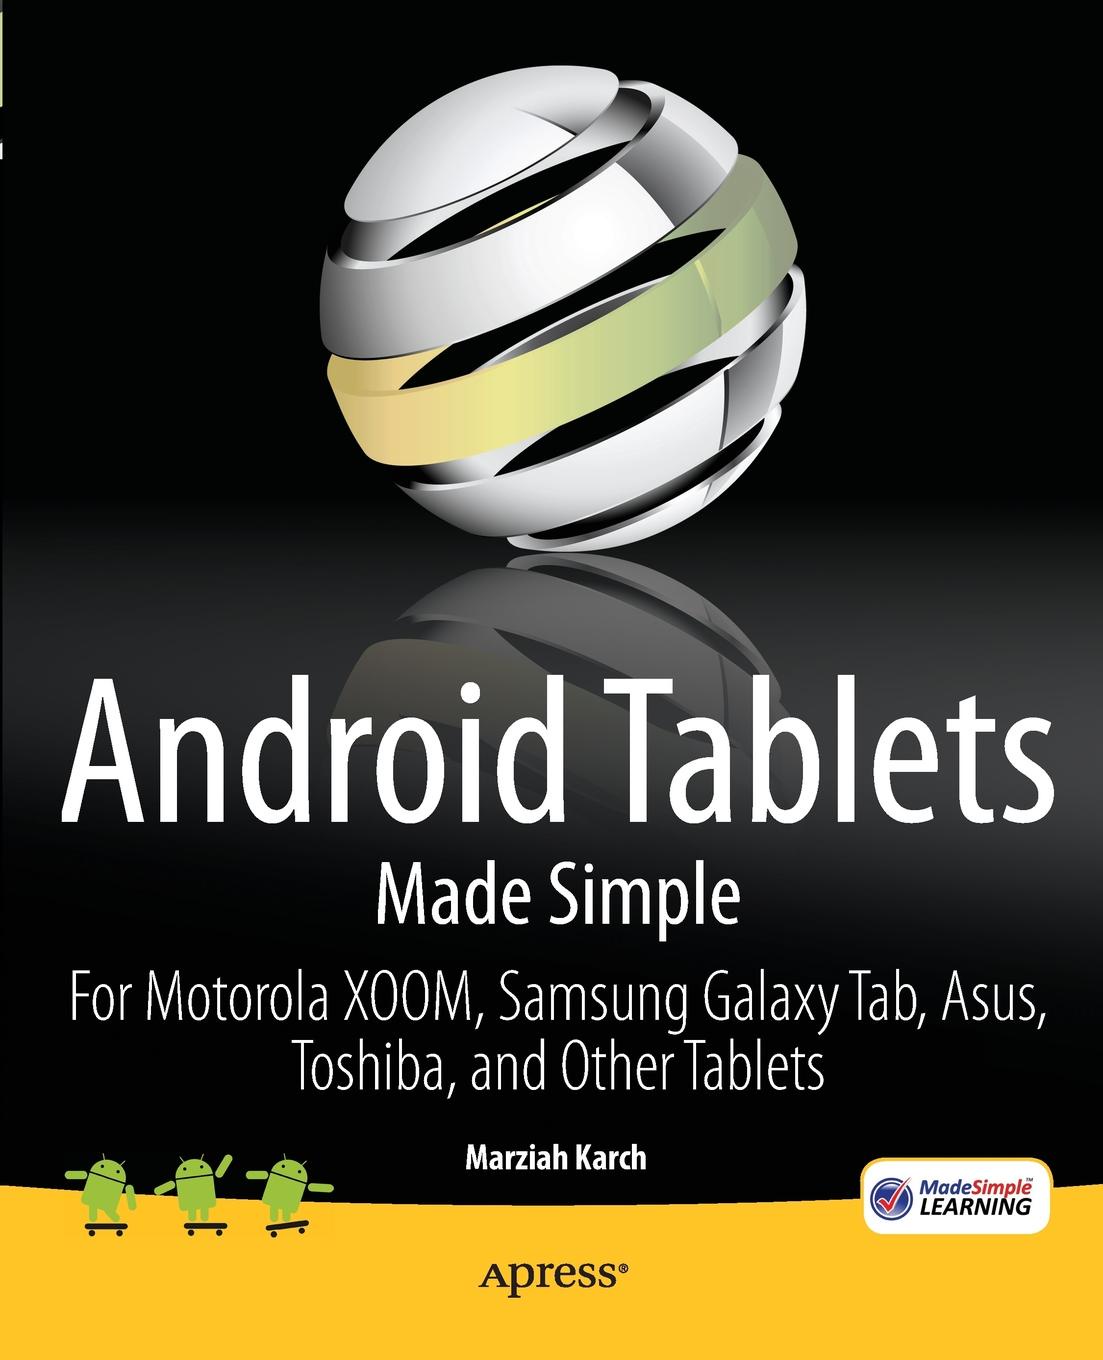 Android Tablets Made Simple. For Motorola XOOM, Samsung Galaxy Tab, Asus, Toshiba and Other Tablets